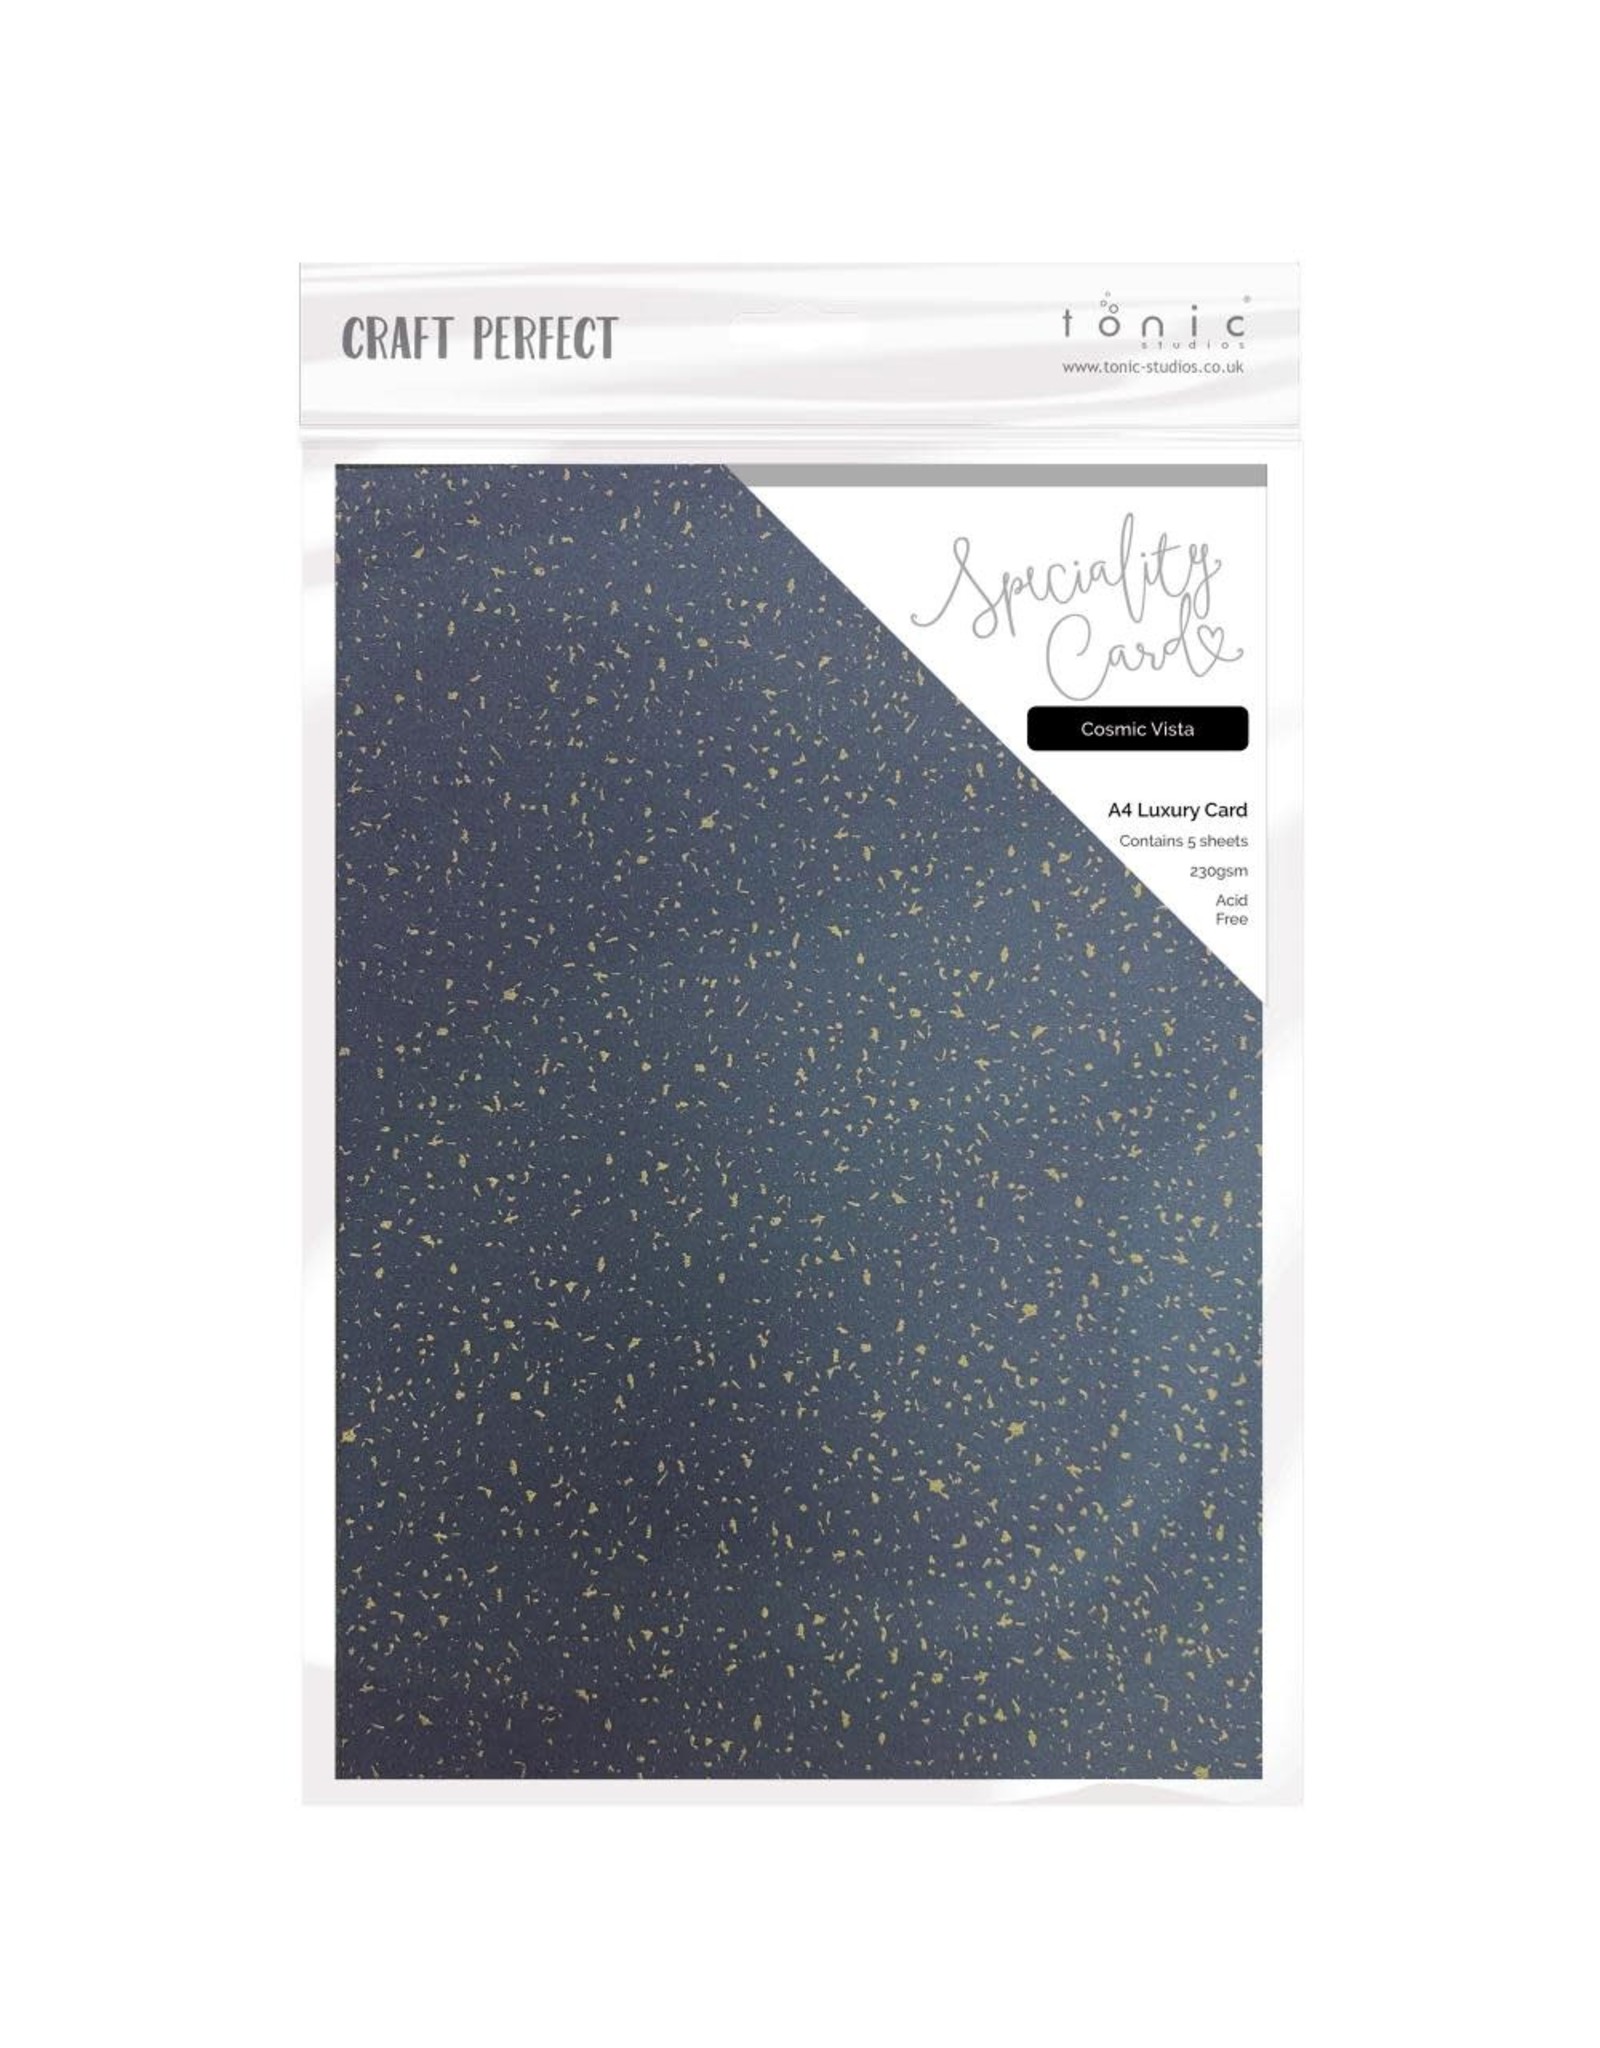 TONIC TONIC STUDIOS SPECIALITY CARD A4 LUXURY EMBOSSED CARD COSMIC VISTA 5/PK